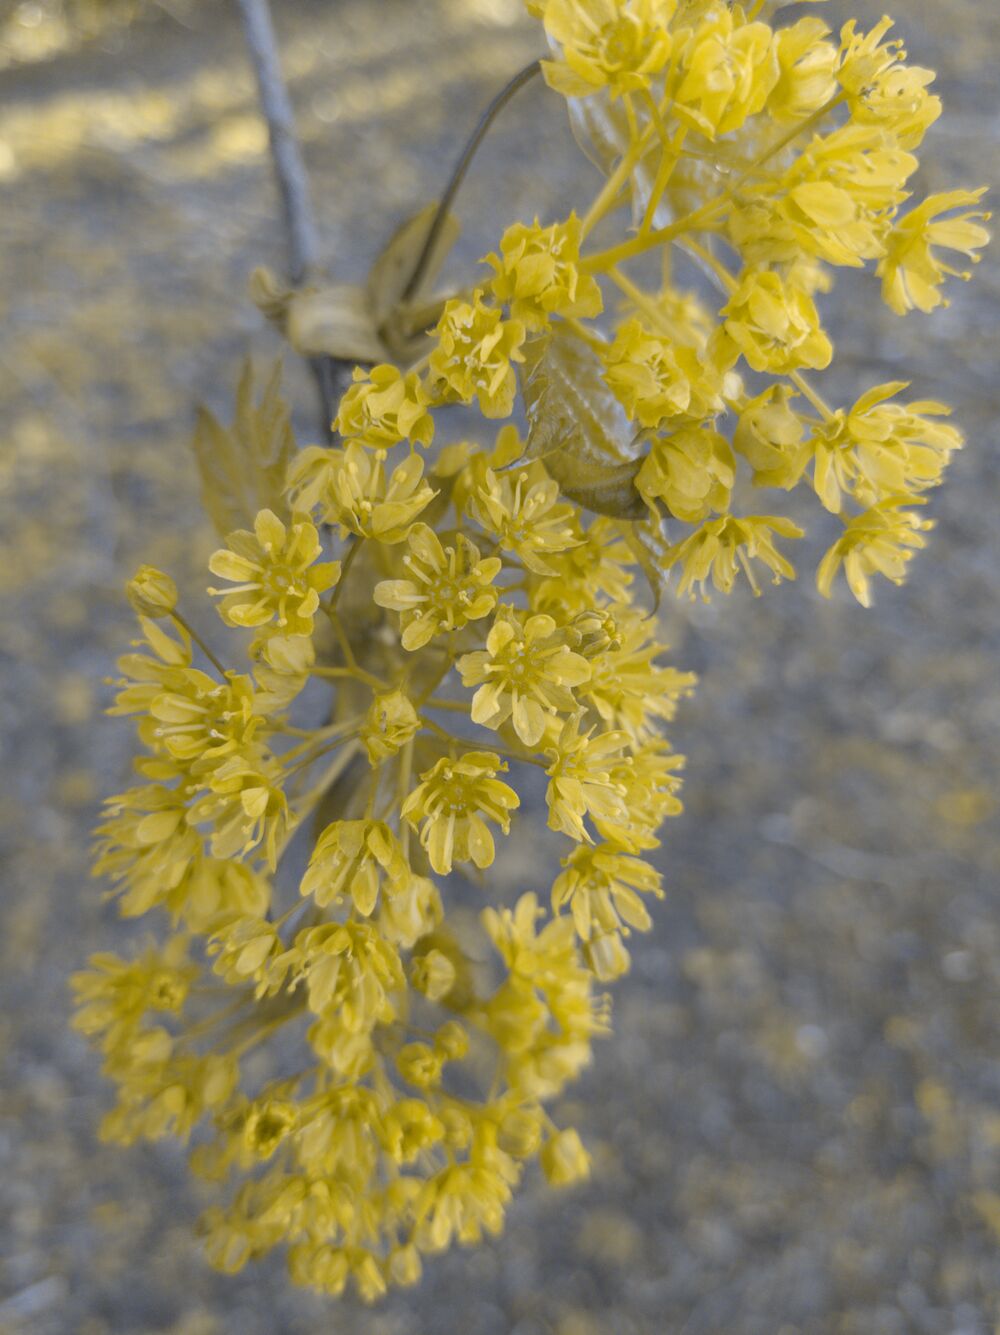 Looking down on a cluster of yellow flowers on a tree branch